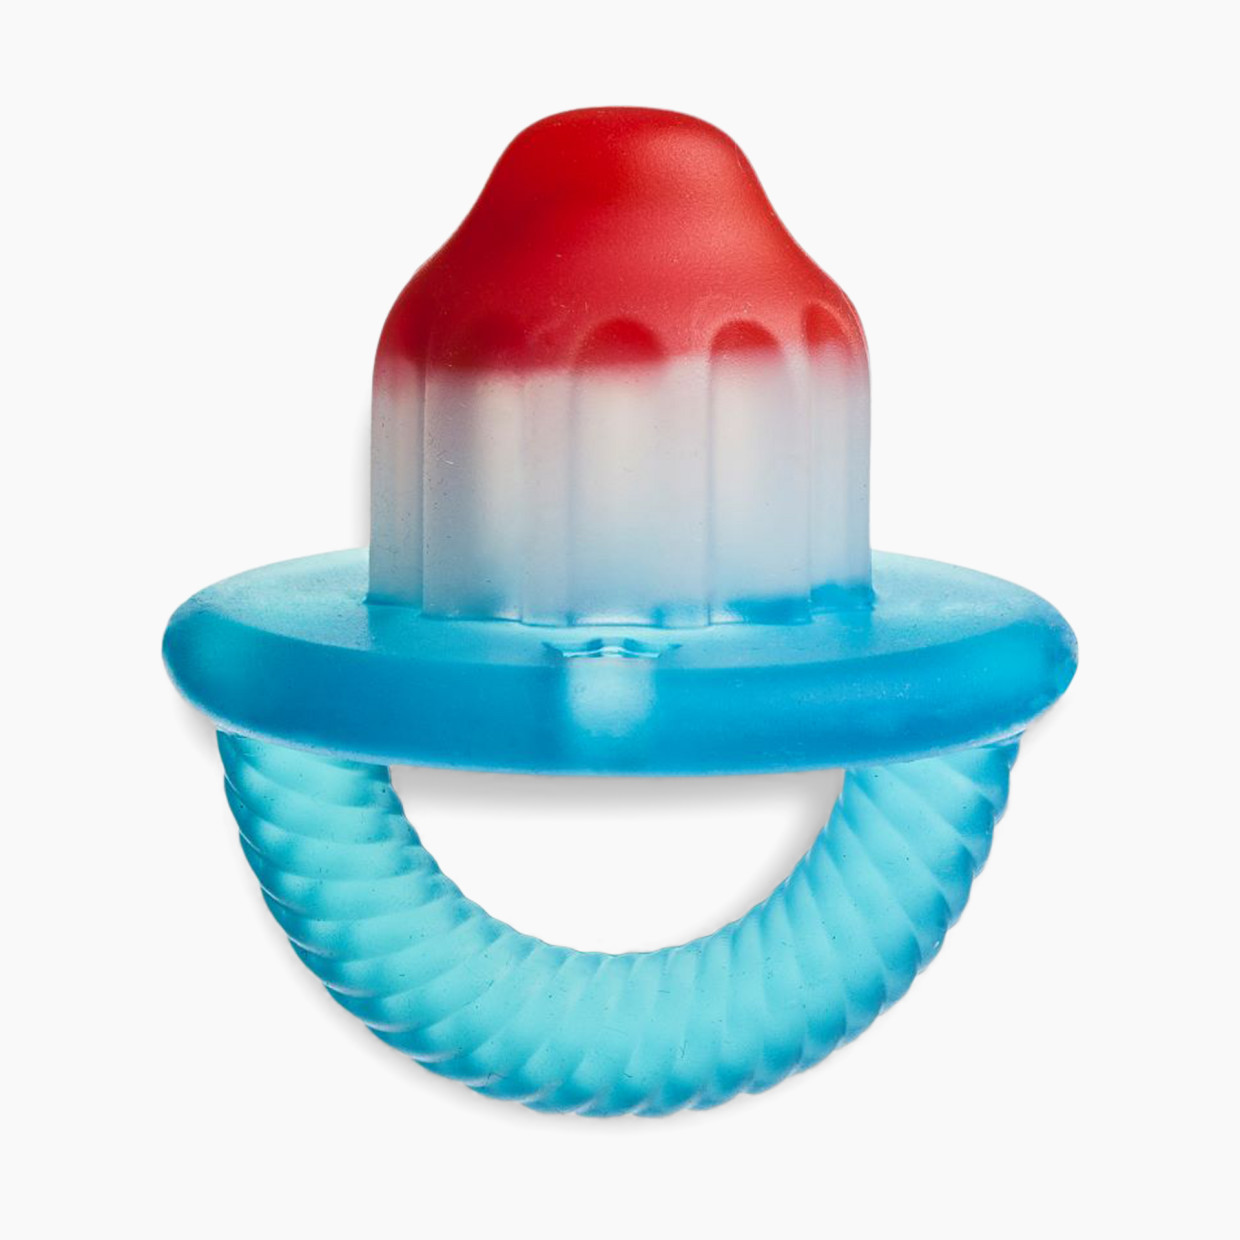 Itzy Ritzy Soothing Silicone Teether - Hero Pop.